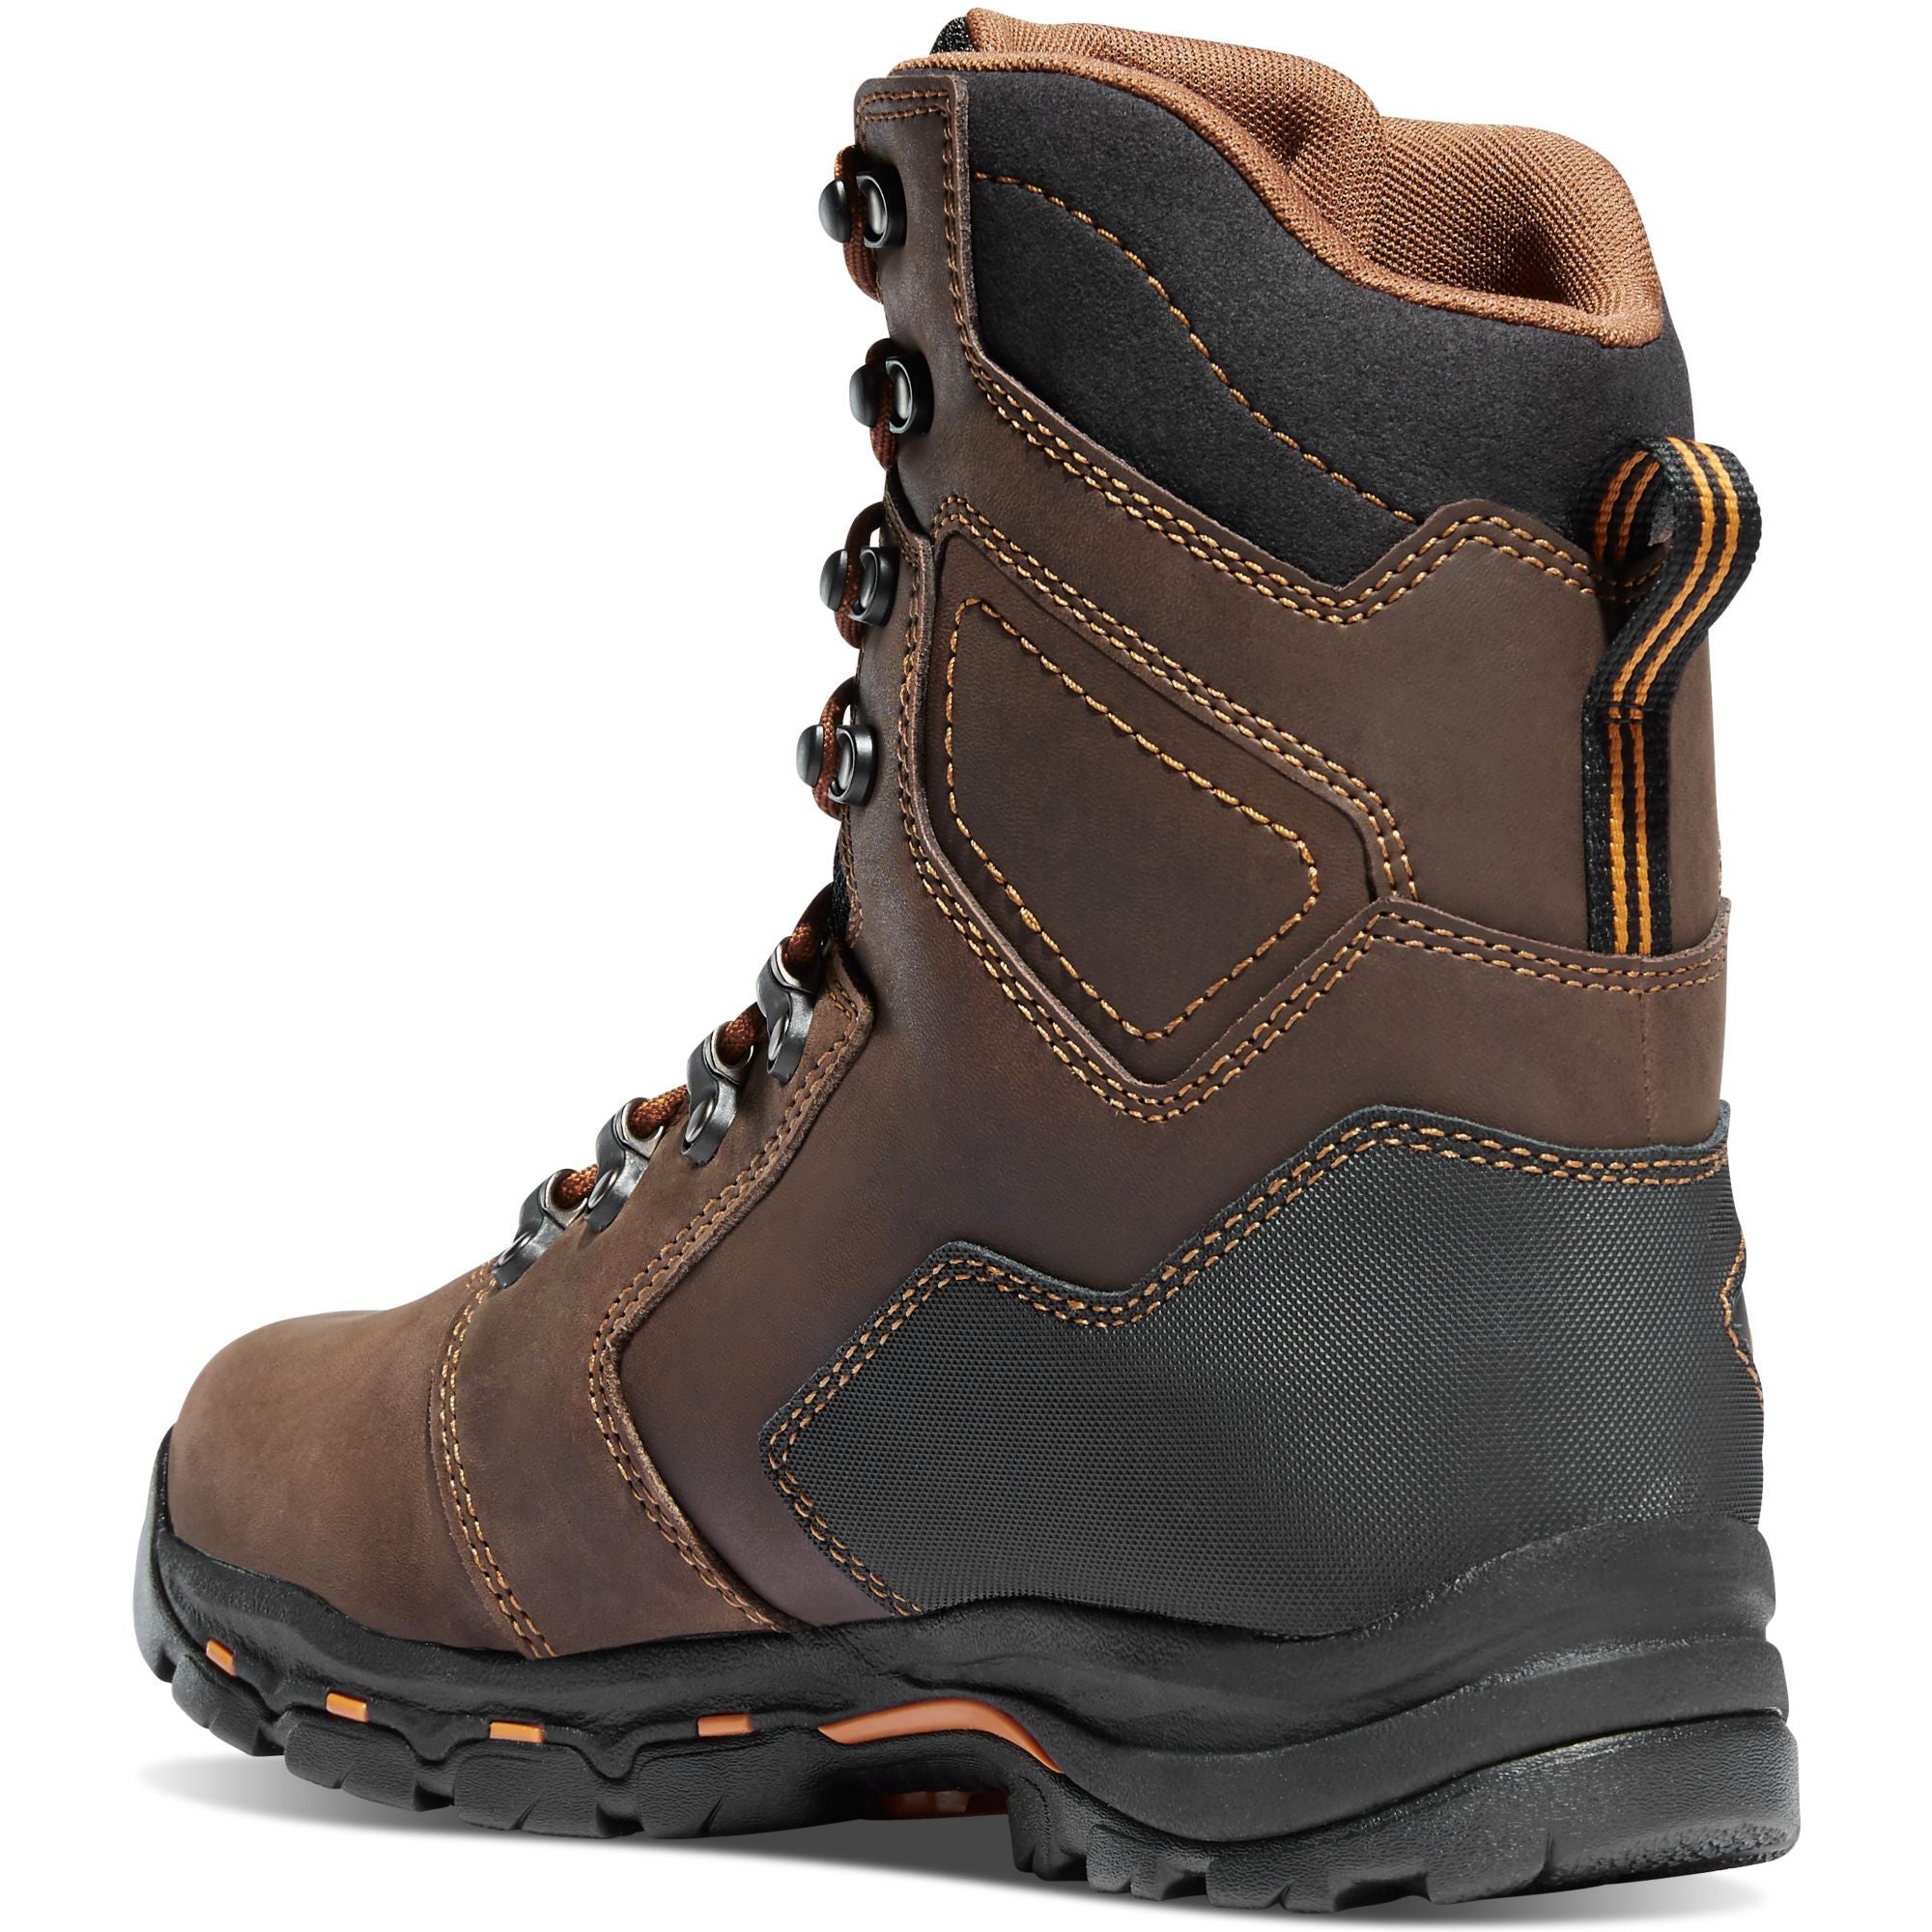 Danner Men's Vicious 8" Comp Toe Insulated WP Work Boot Brown - 13874  - Overlook Boots